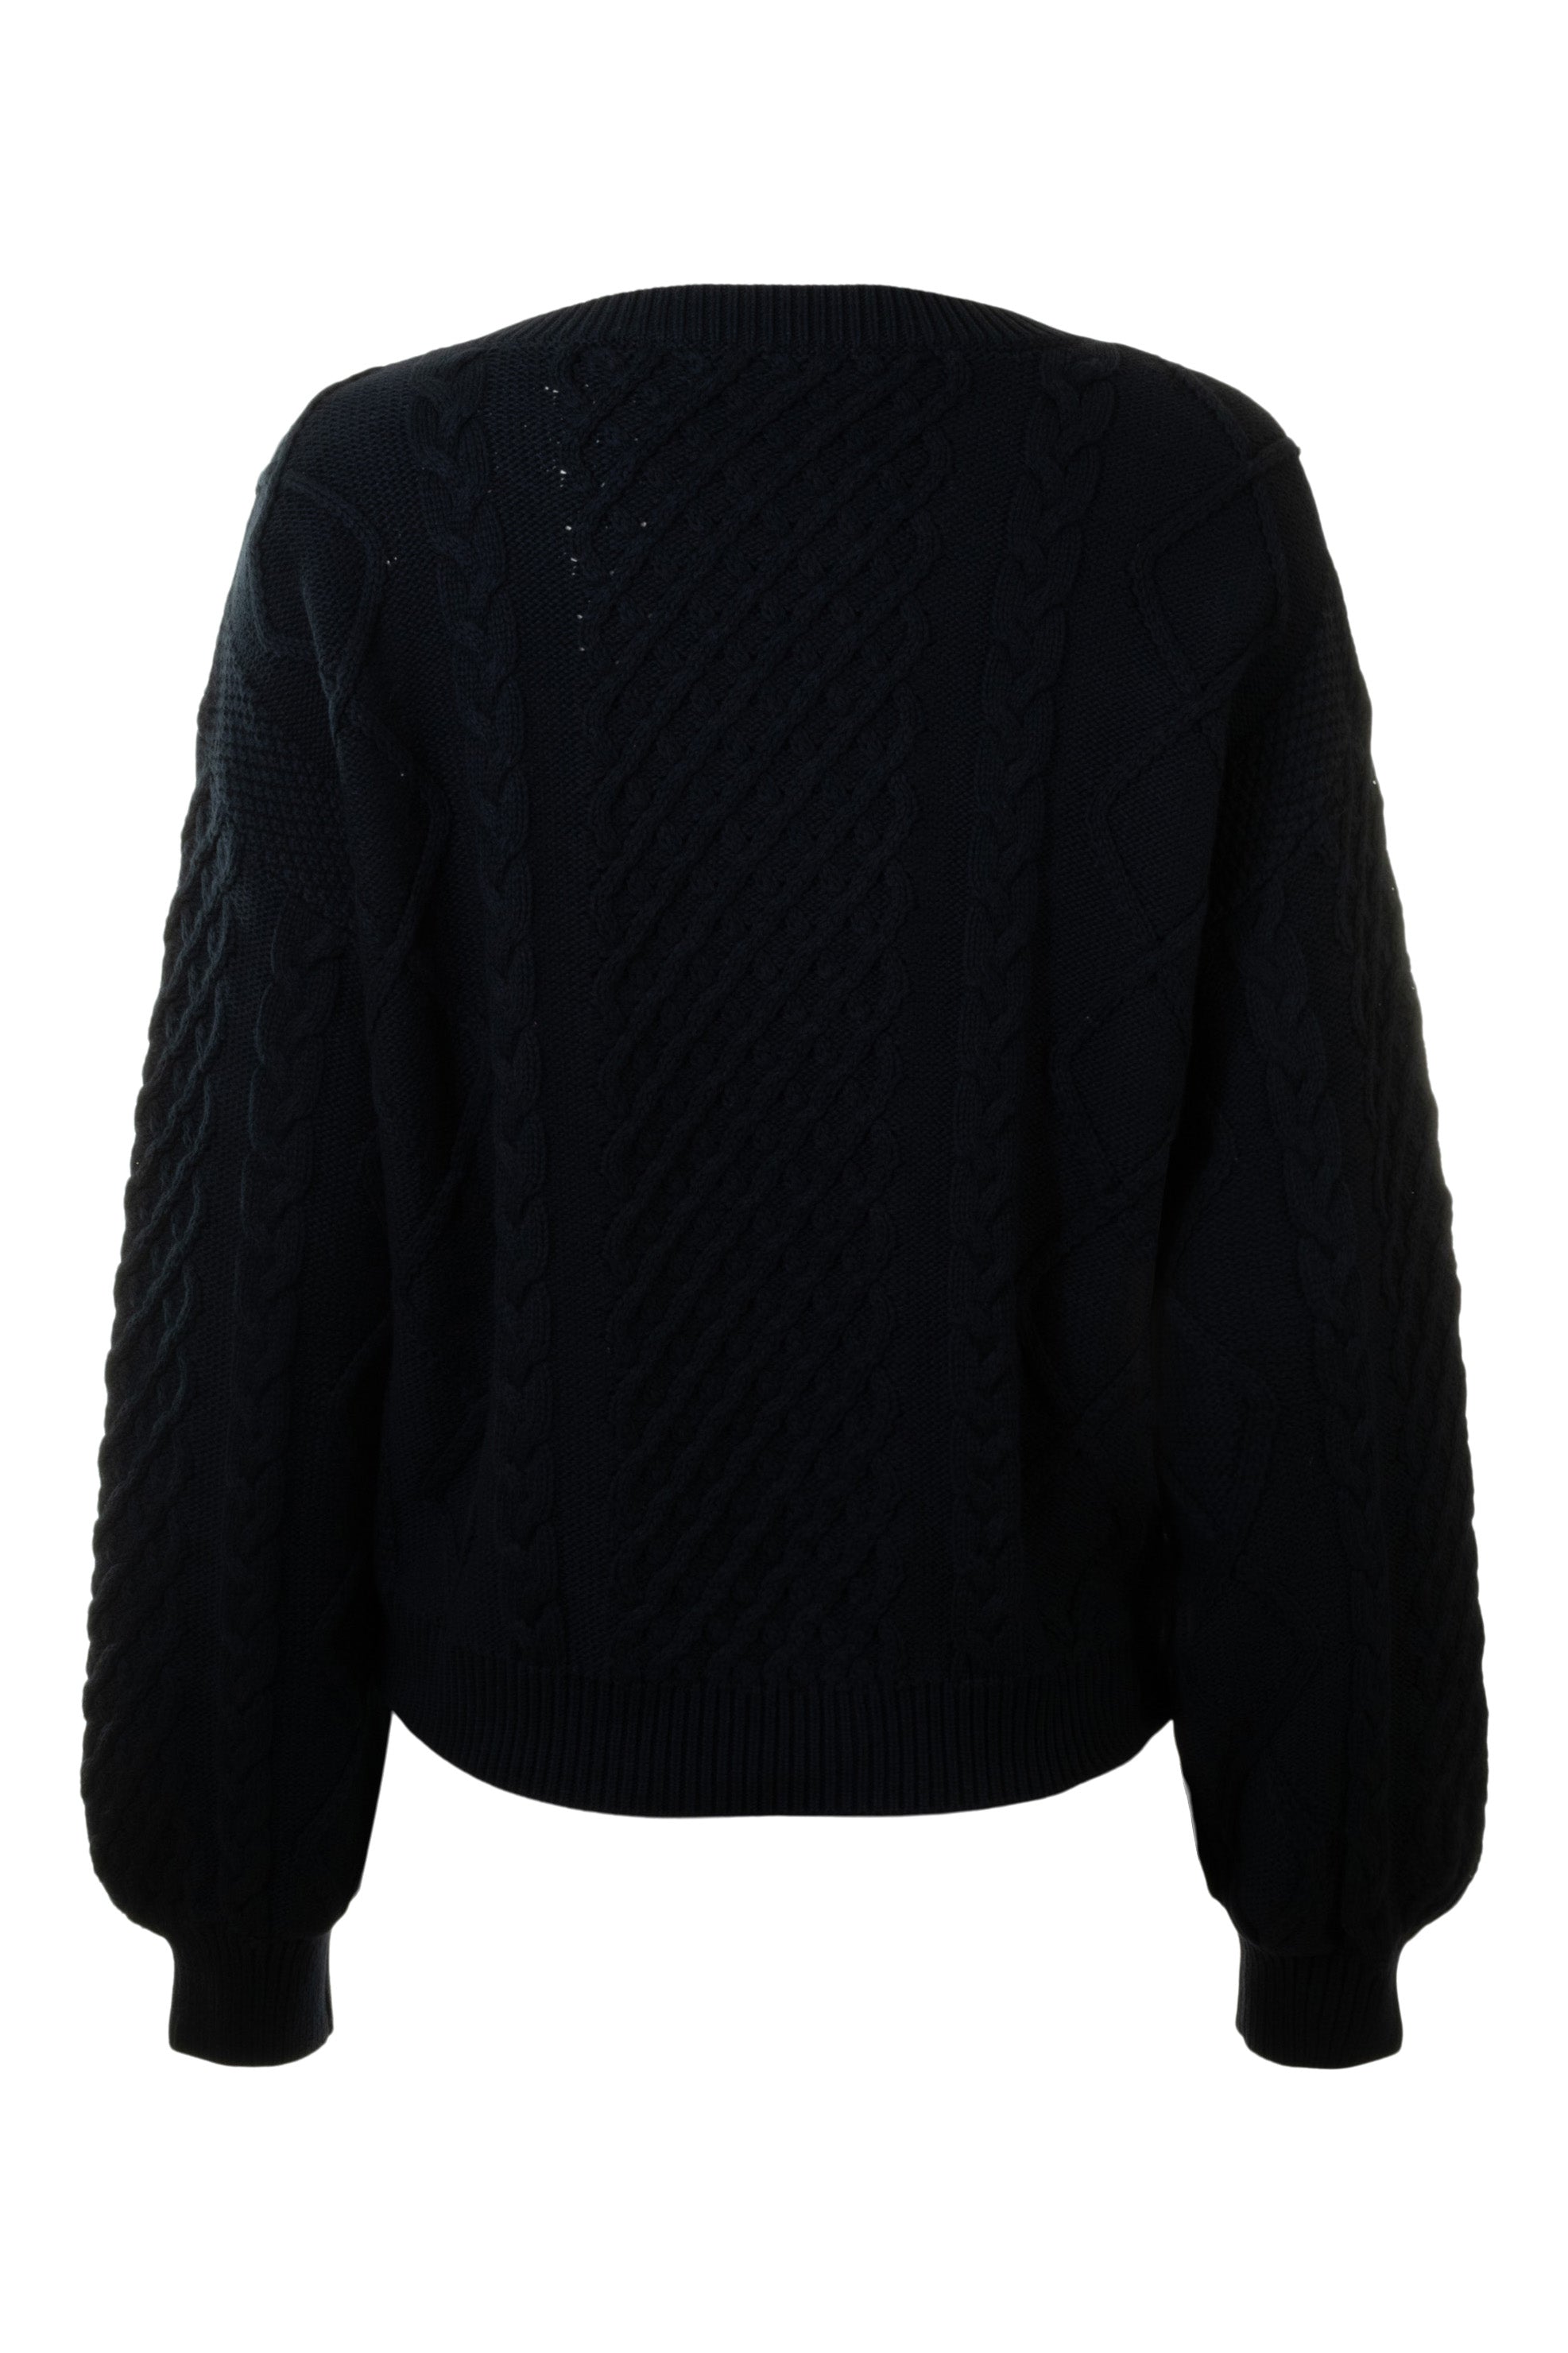 Repeat Cashmere Cotton Cable Textured Crew